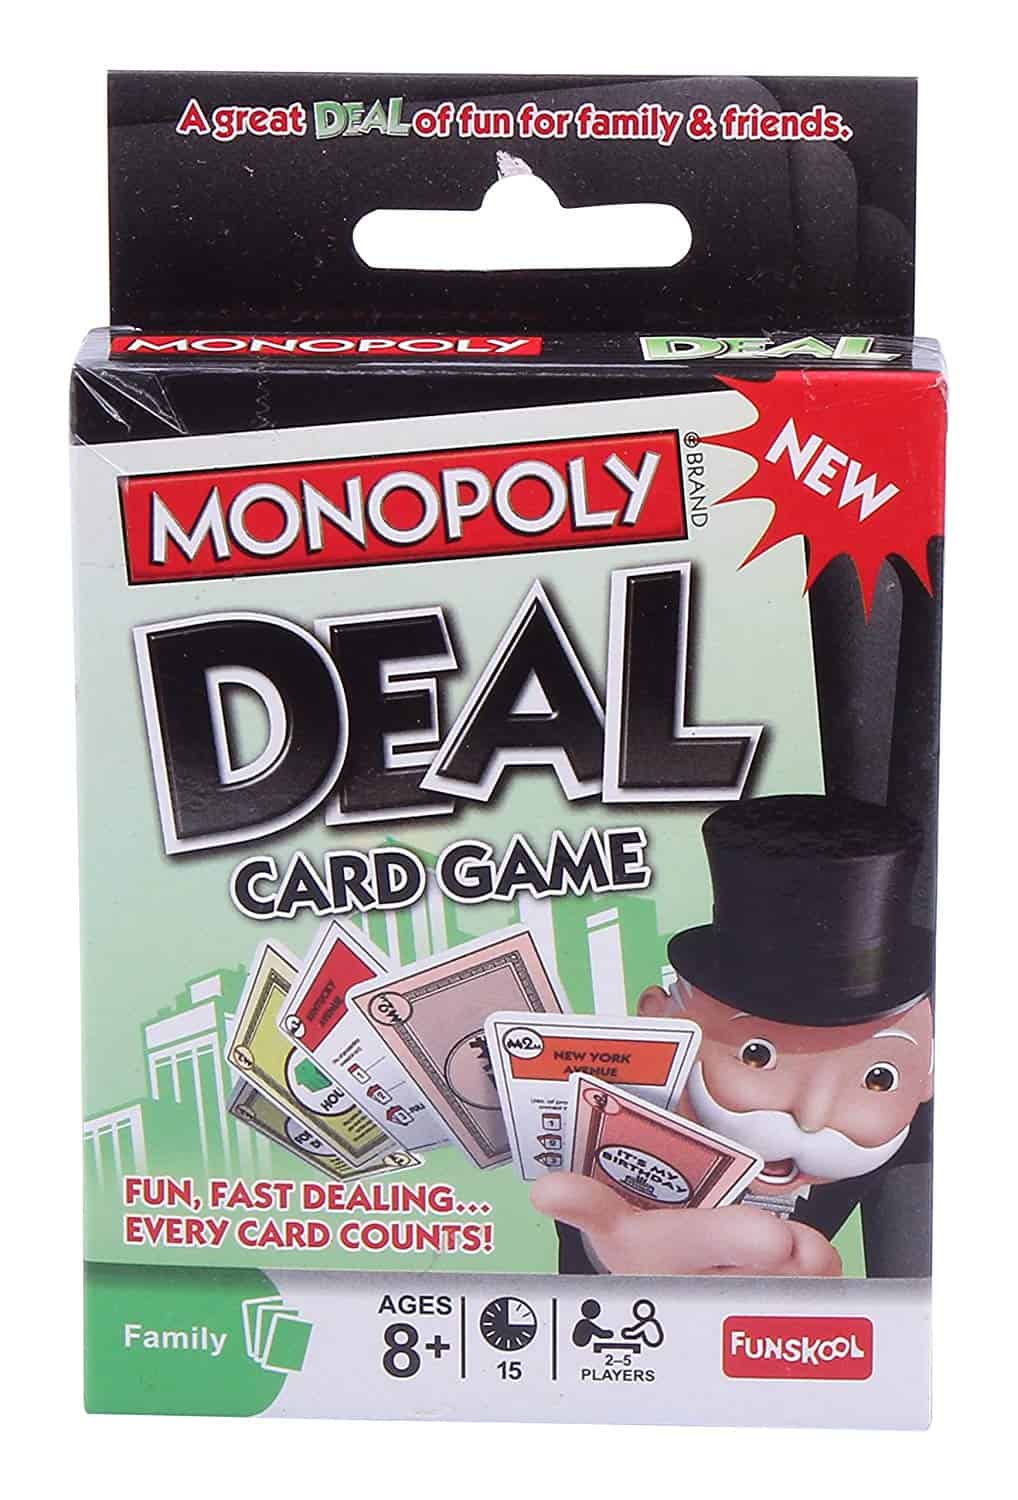 Monopoly deal card game for the plane